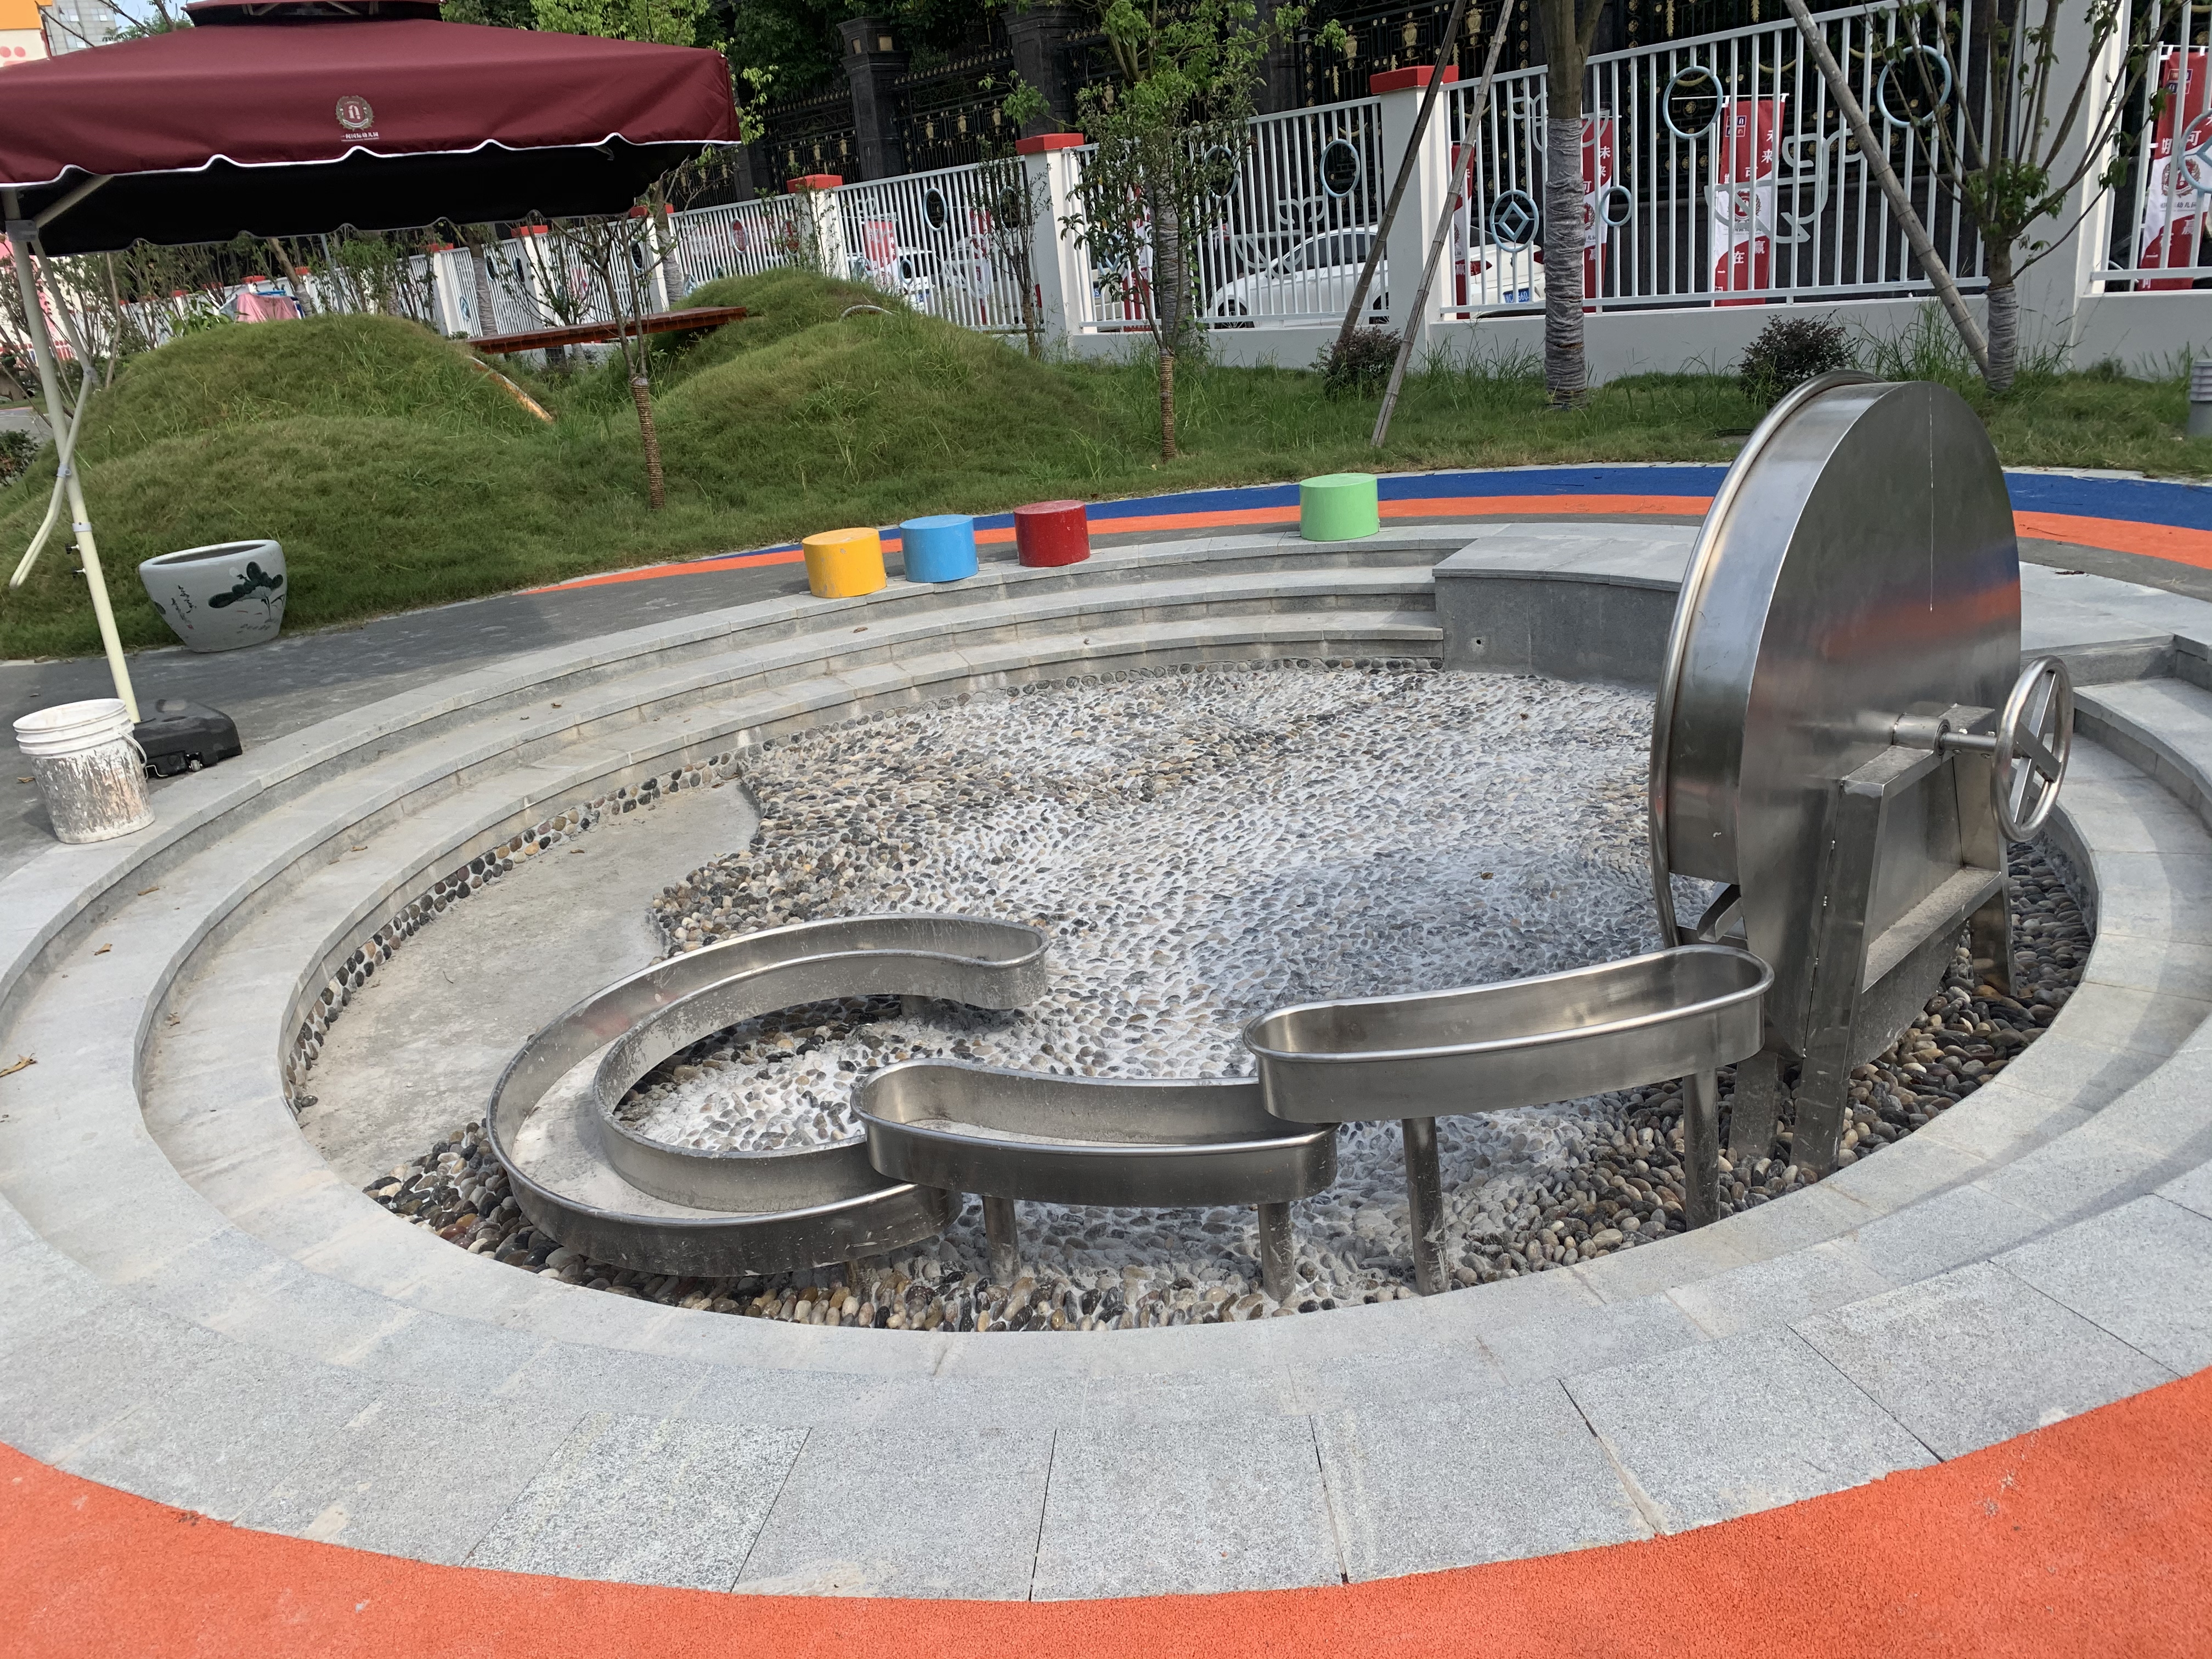 Stainless steel slides creat safety and happiness in kids’ playground (3)